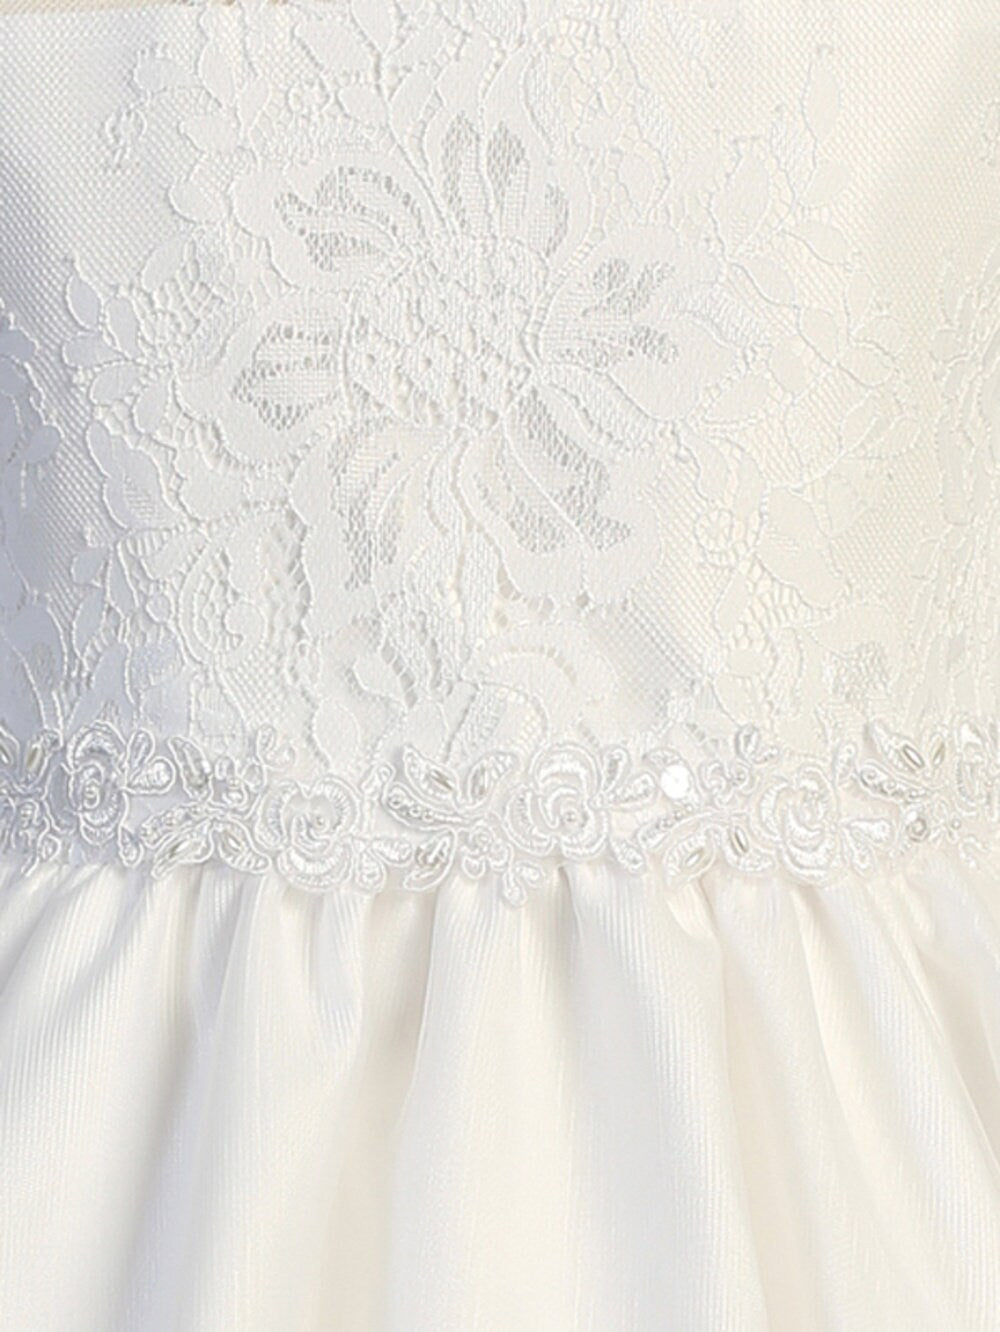 Close-up view of the lace fabric, showcasing the delicate lace details.